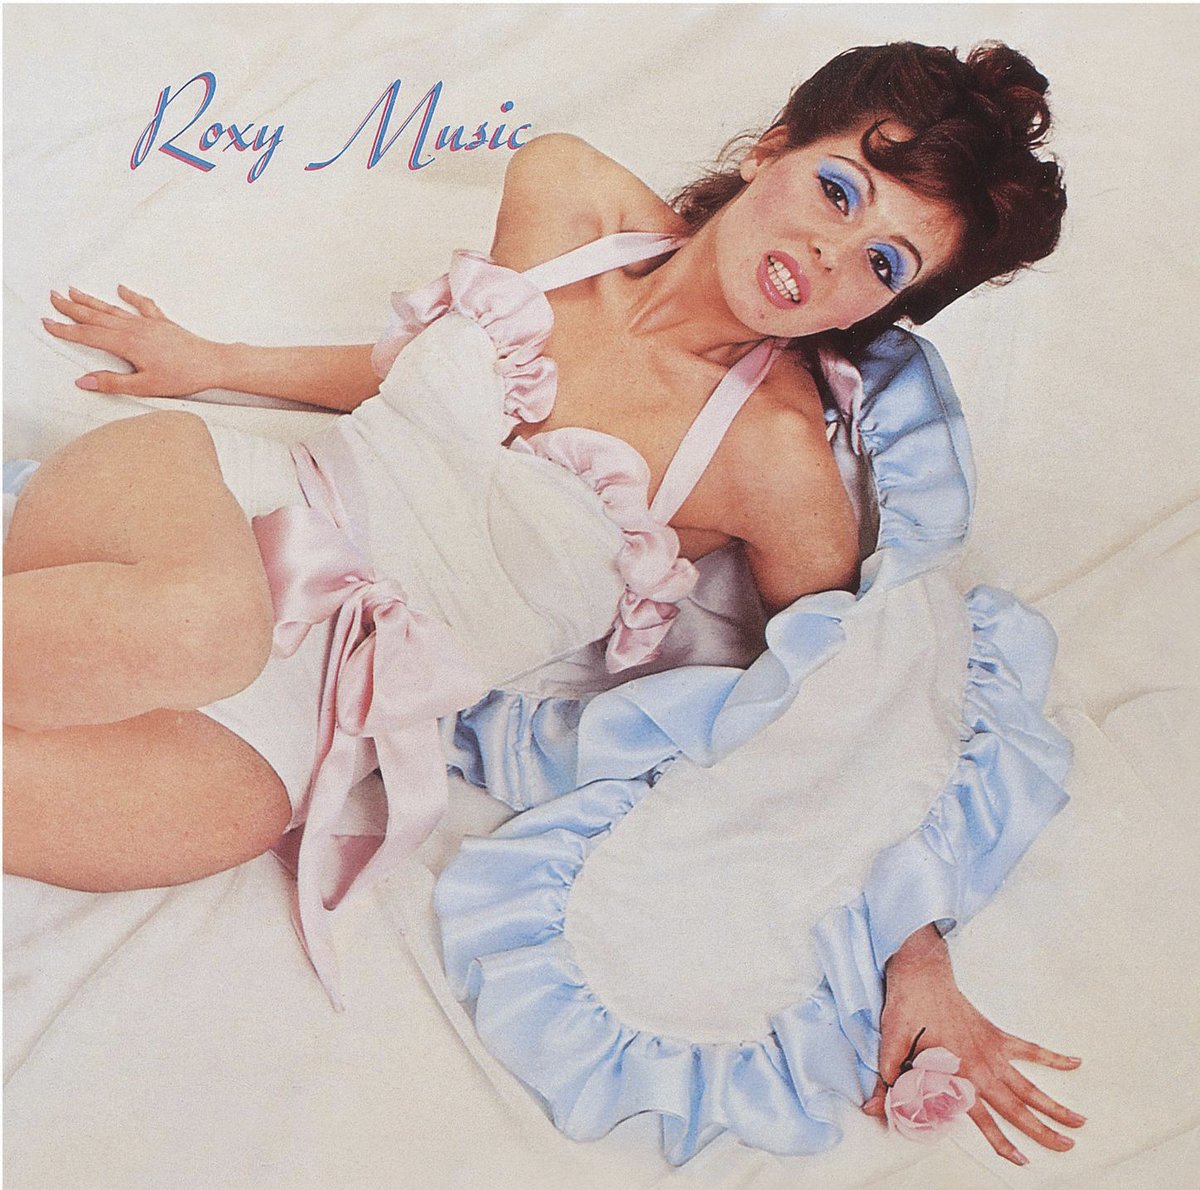 Roxy Music released their eponymous debut album on this day in 1972.
lnk.to/roxy-roxymusic 
#roxymusic #onthisday